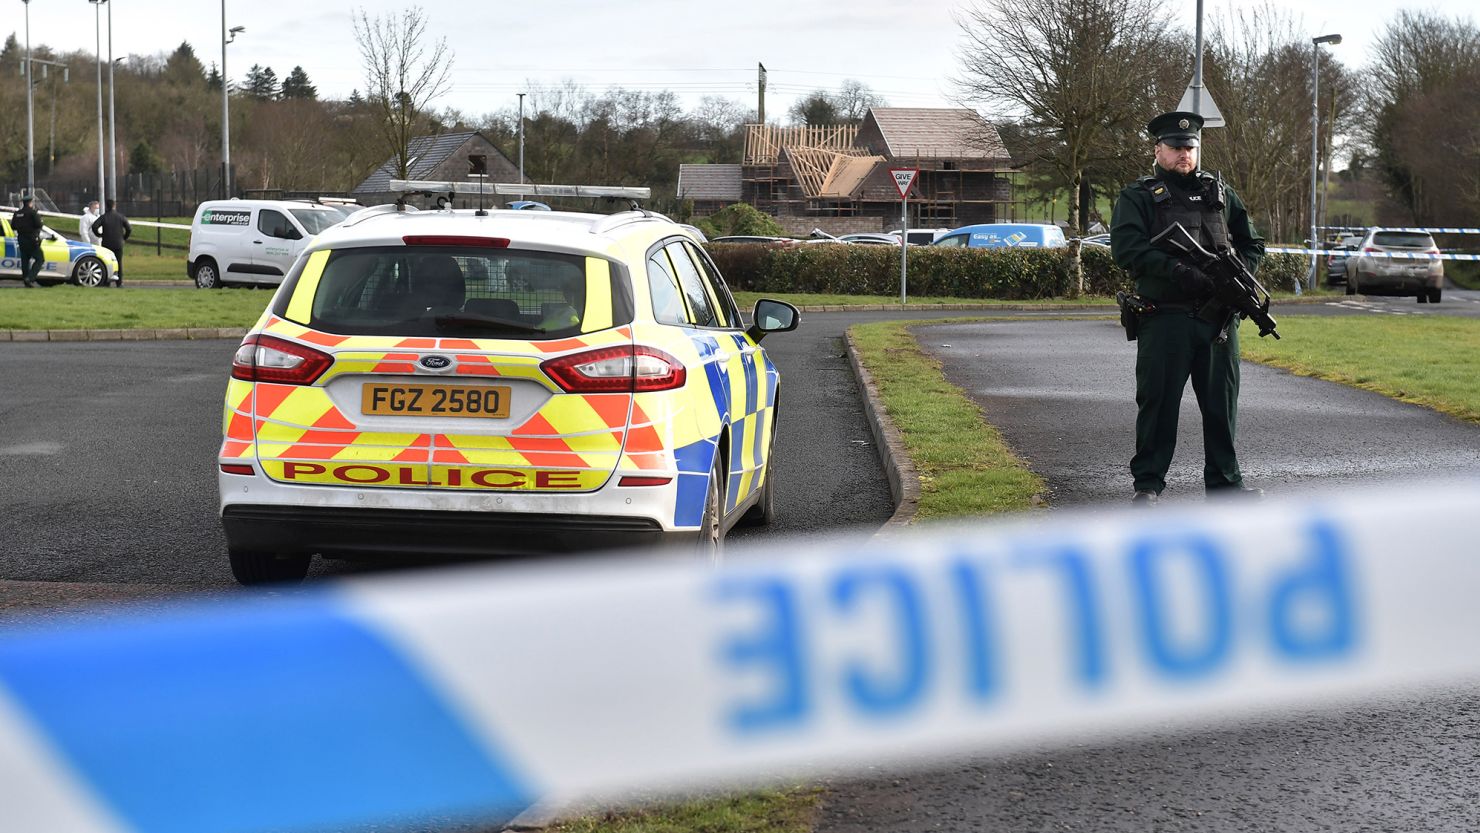 Police pictured at the scene of the shooting of a senior officer in Omagh, Northern Ireland on February 23. 